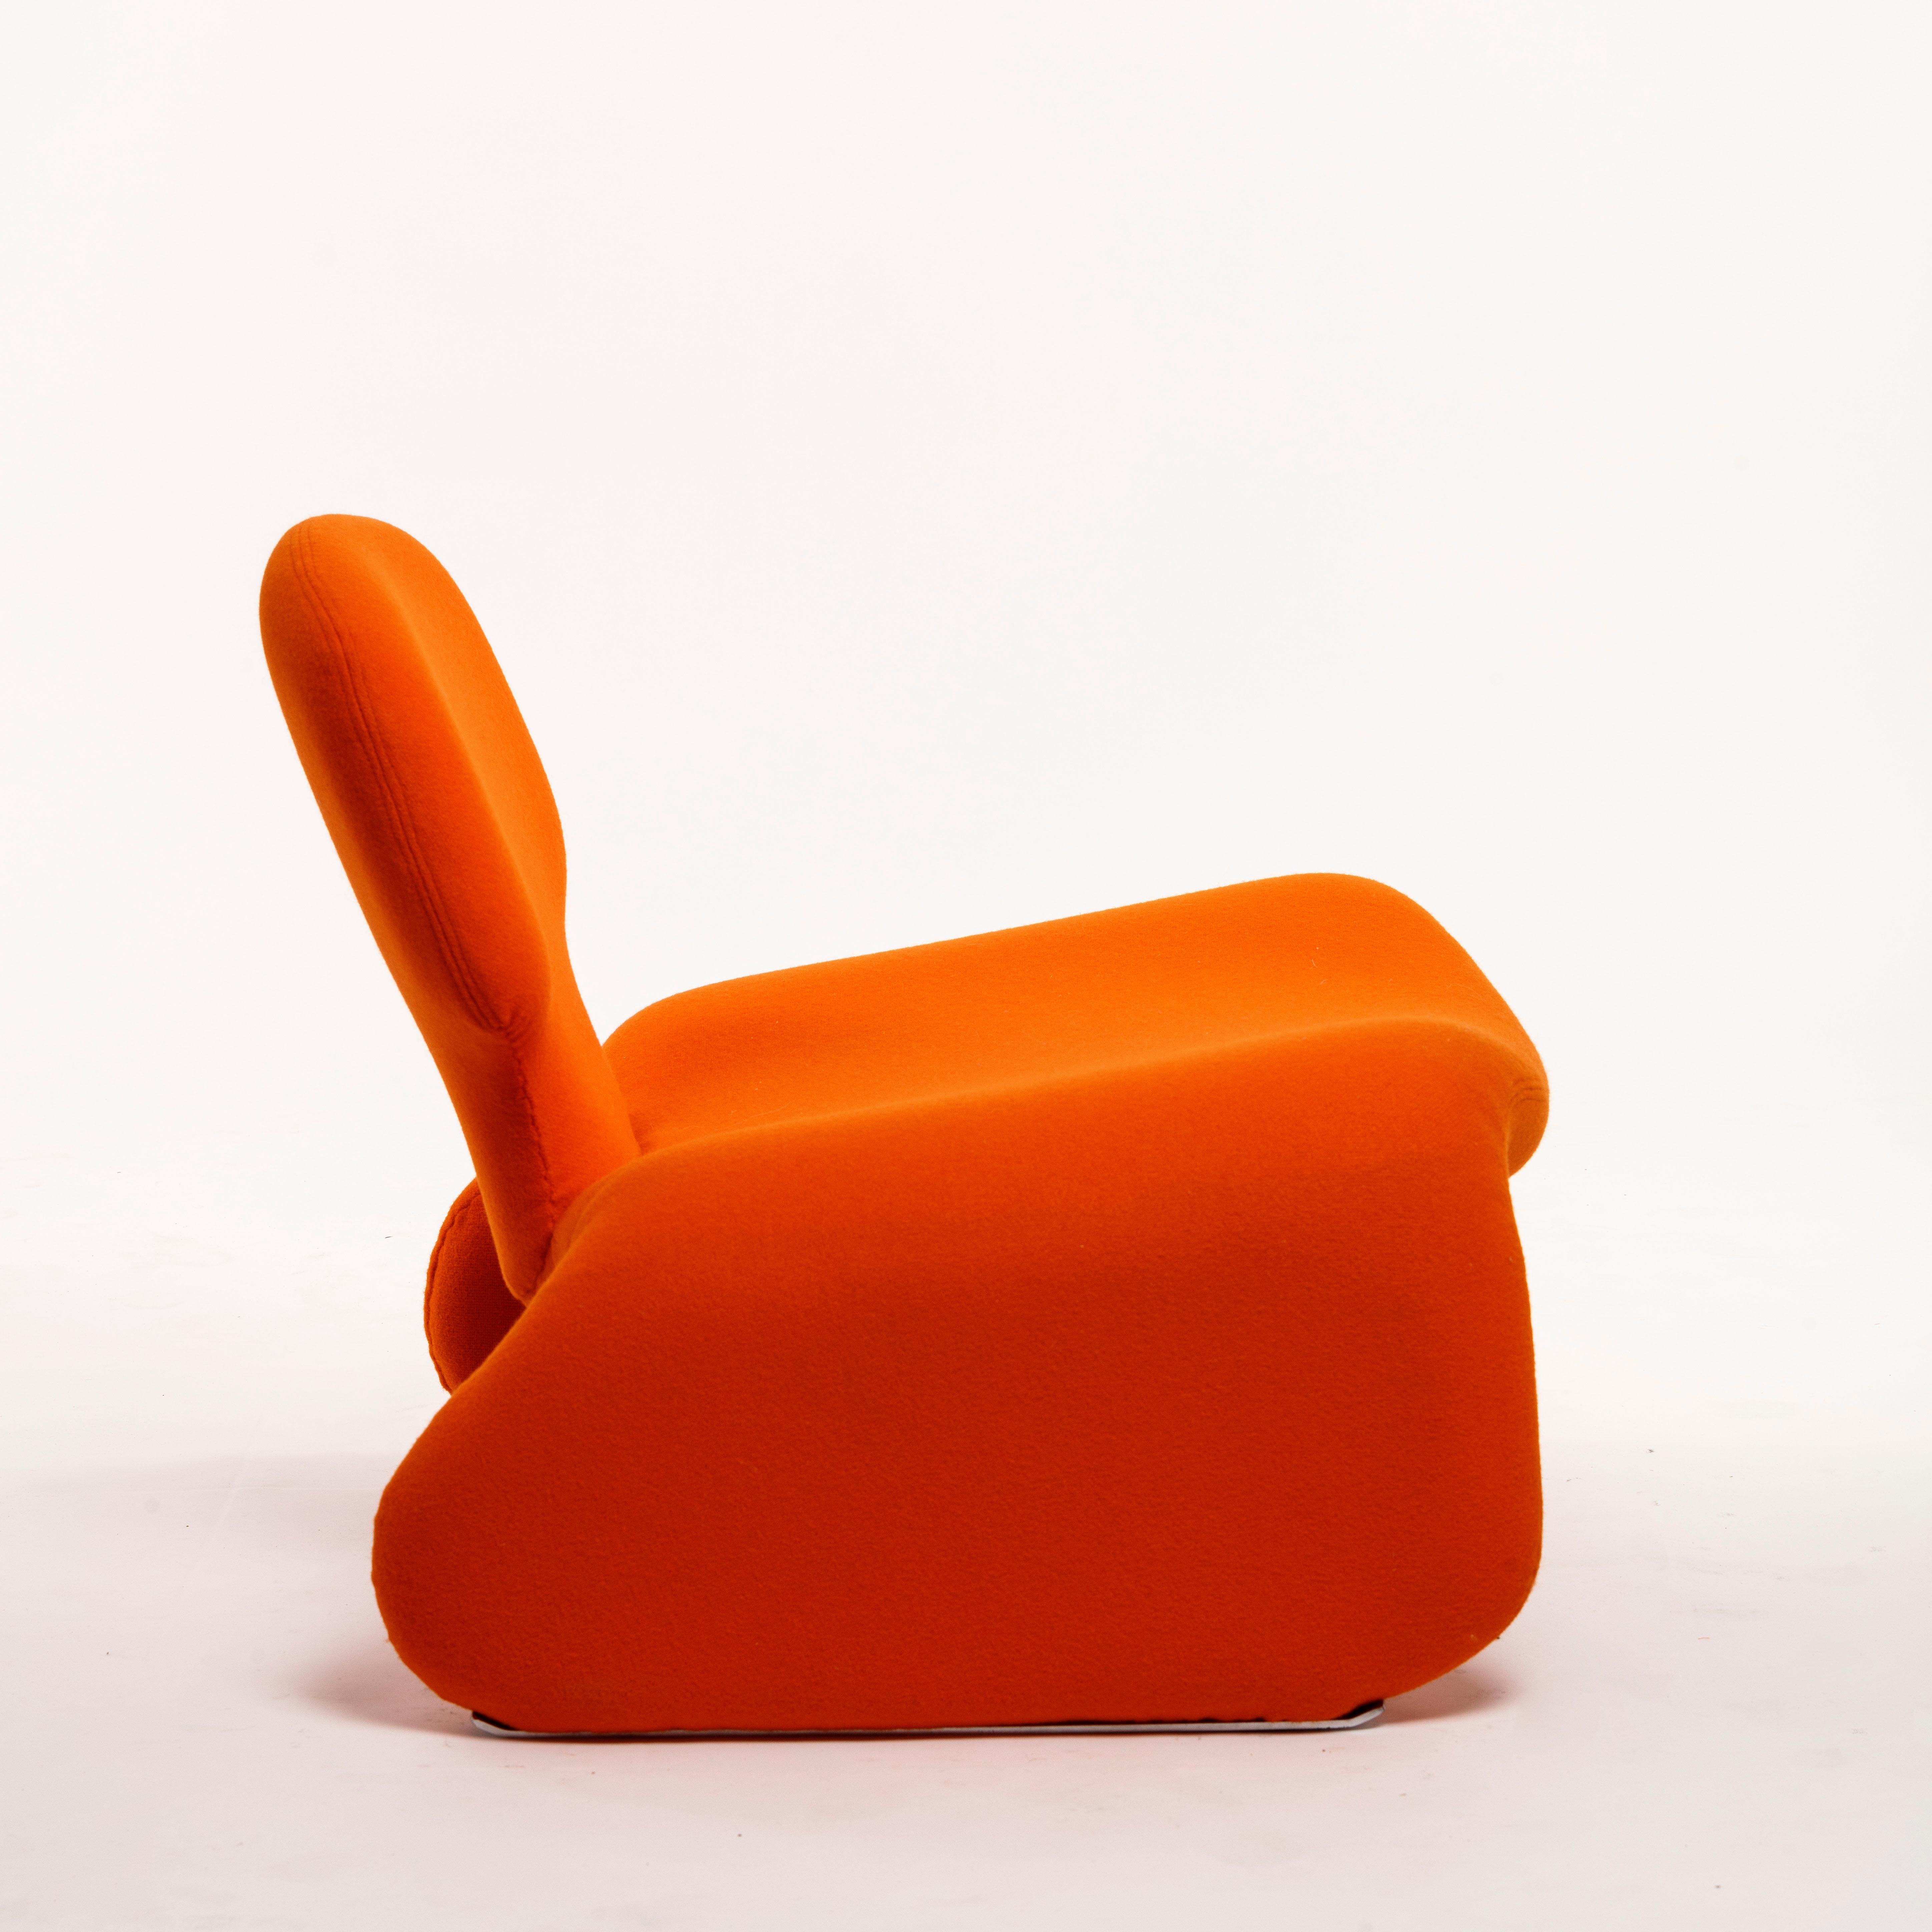 Olivier Mourgue Iconic Djinn Chair Airborne 1963 Reupholstered in Orange Kvadrat In Good Condition For Sale In Santa Gertrudis, Baleares